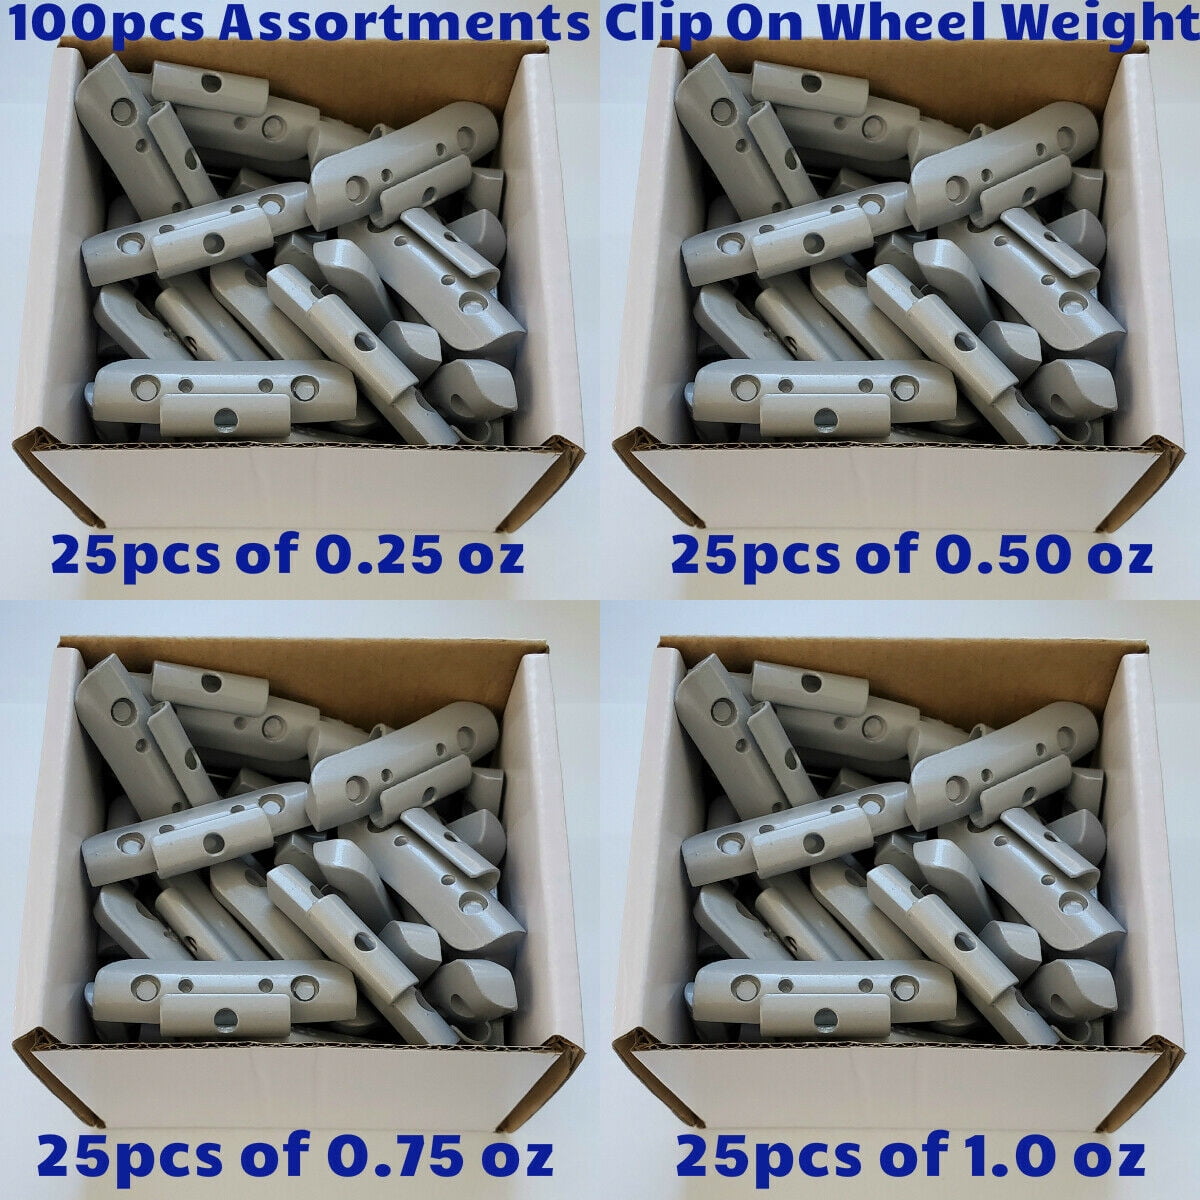 Wheel Balancing Weights AW Type Coated Clip On .50 oz 50 pieces FREE SHIPPING 